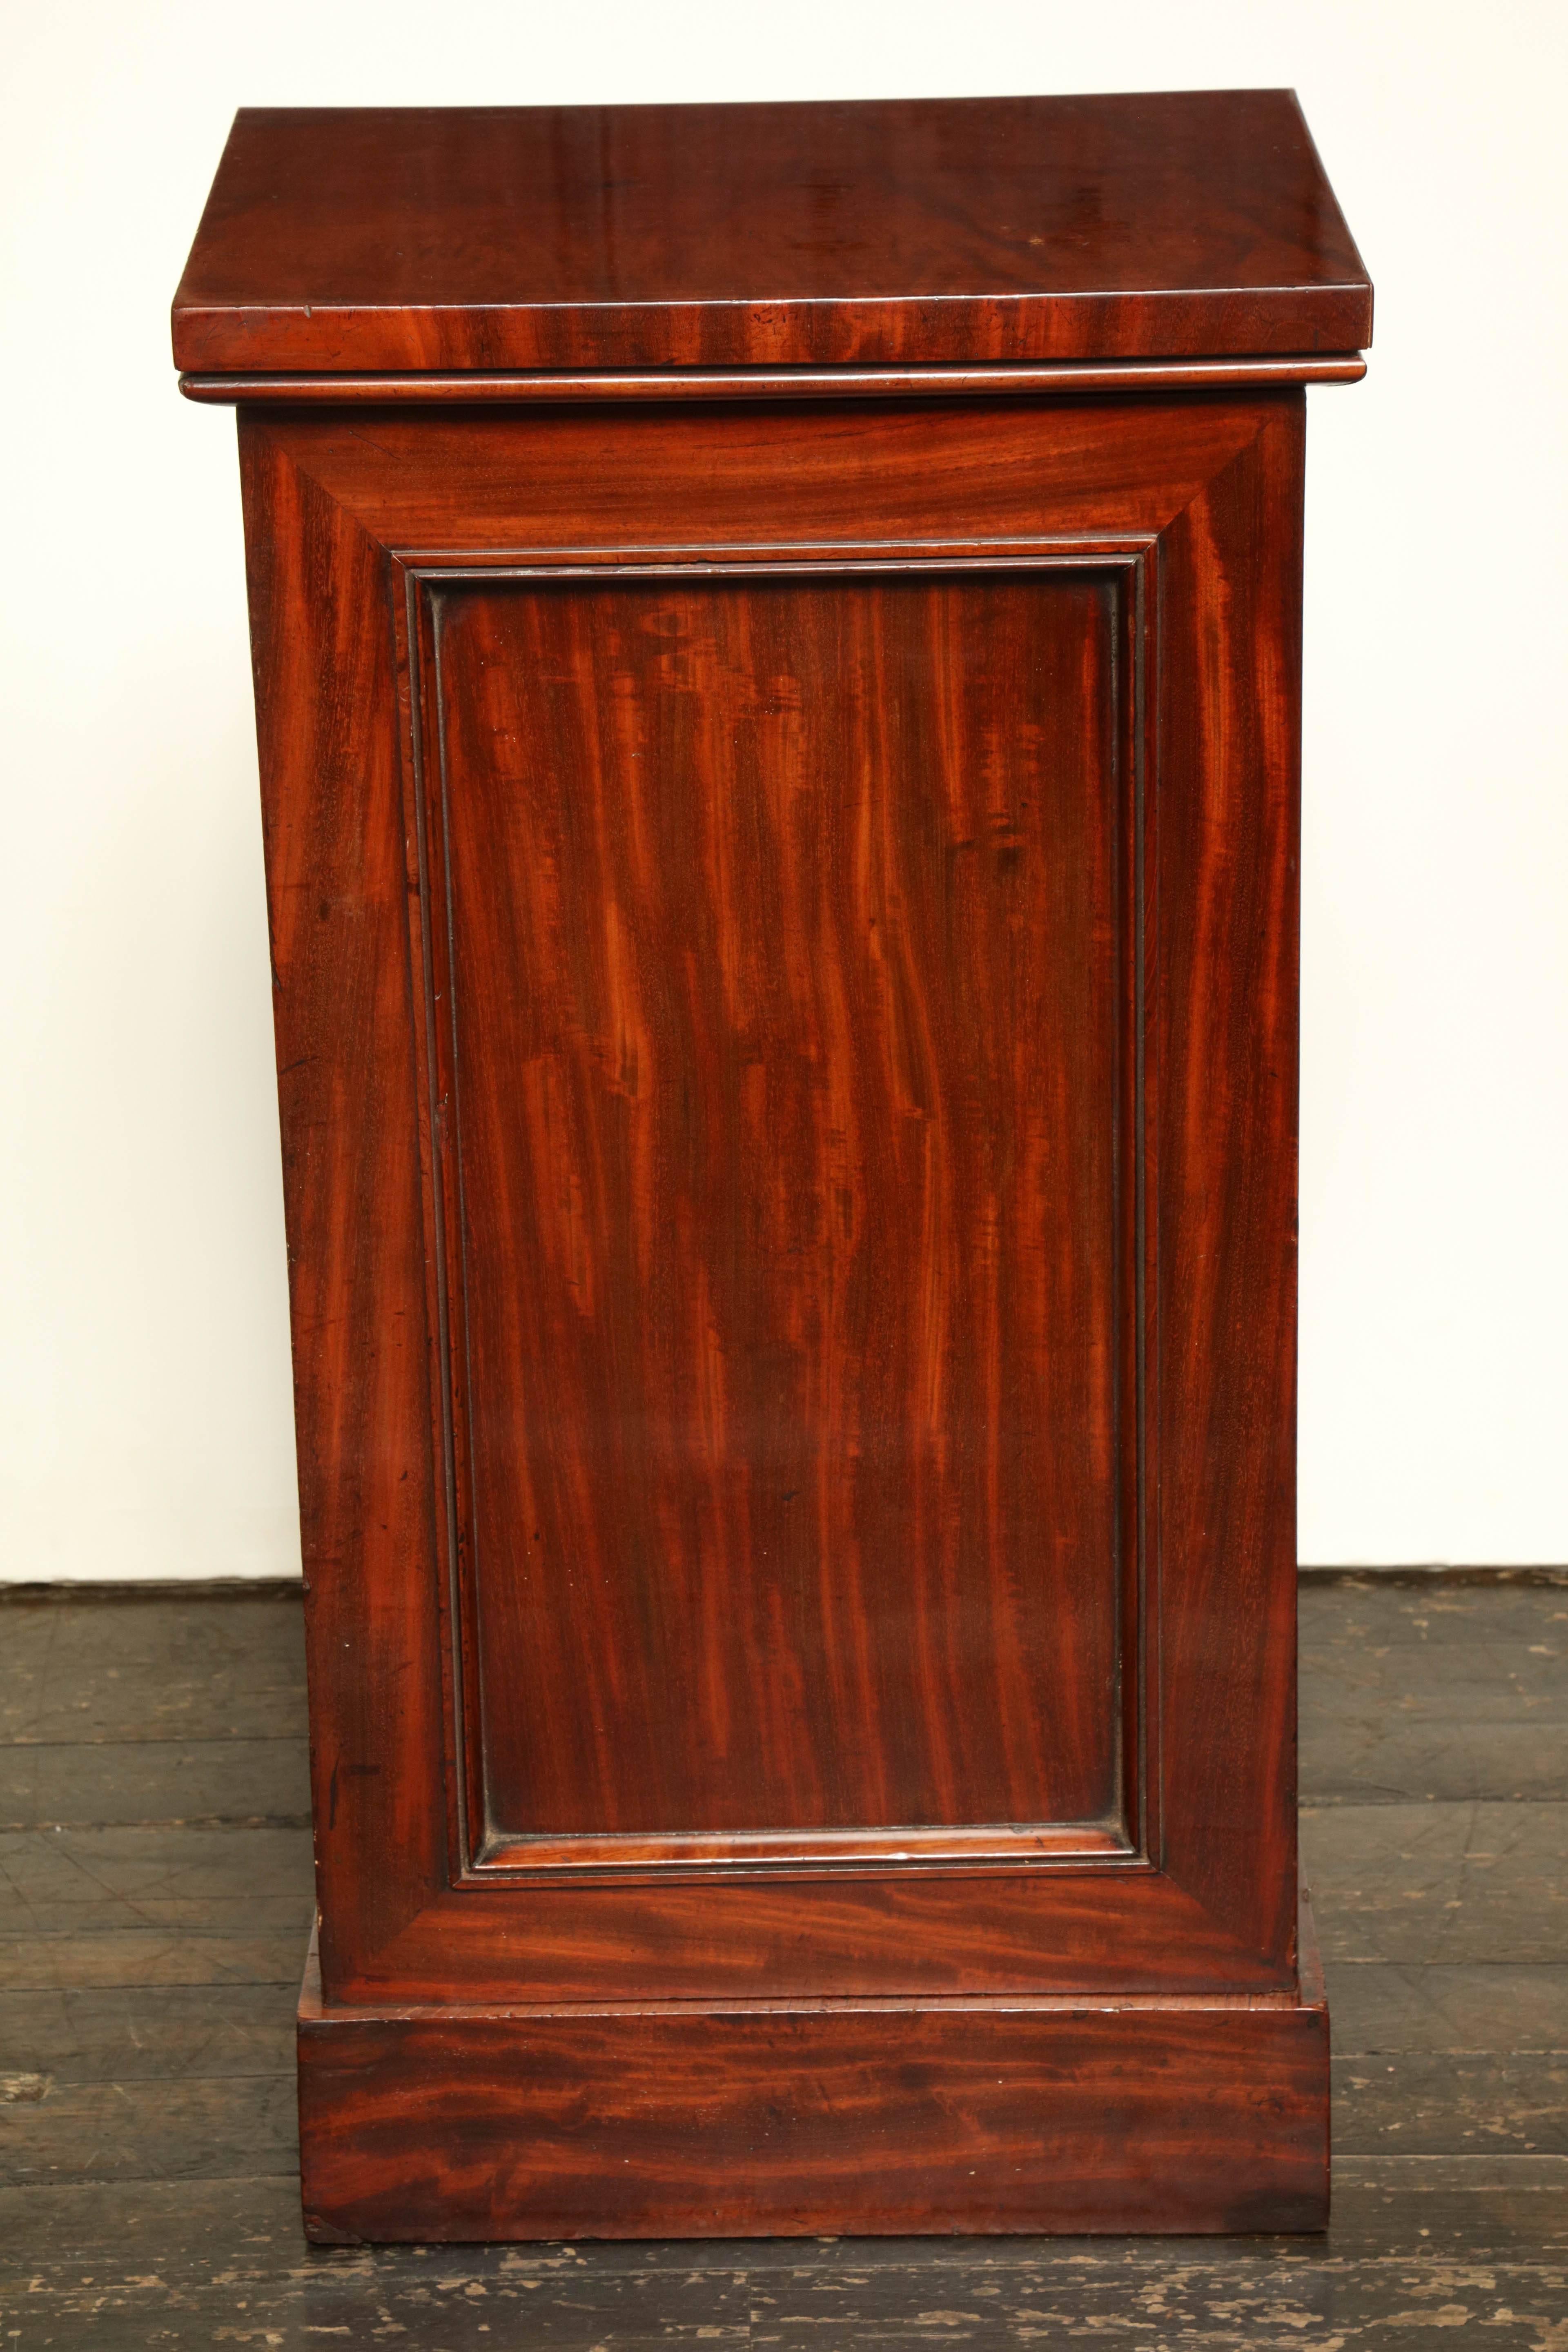 Mahogany Pair of Late 19th Century English Bedside Tables